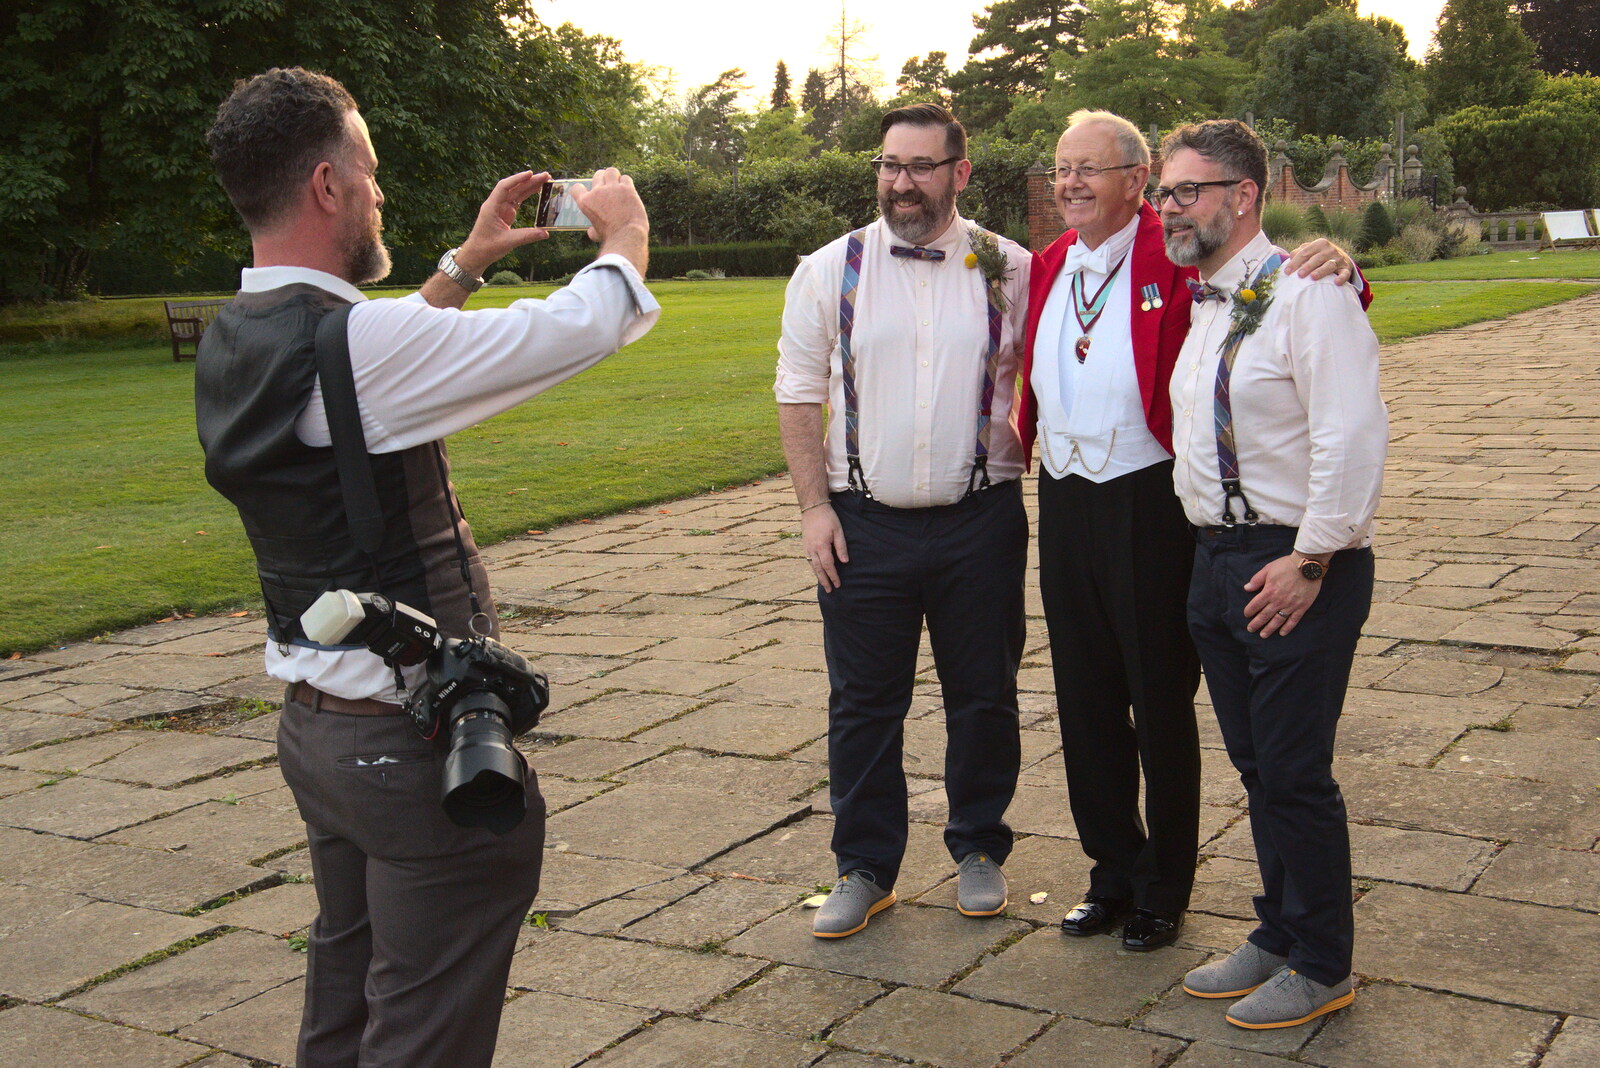 The official photographer takes a phone photo from Petay's Wedding Reception, Fanhams Hall, Ware, Hertfordshire - 20th August 2021